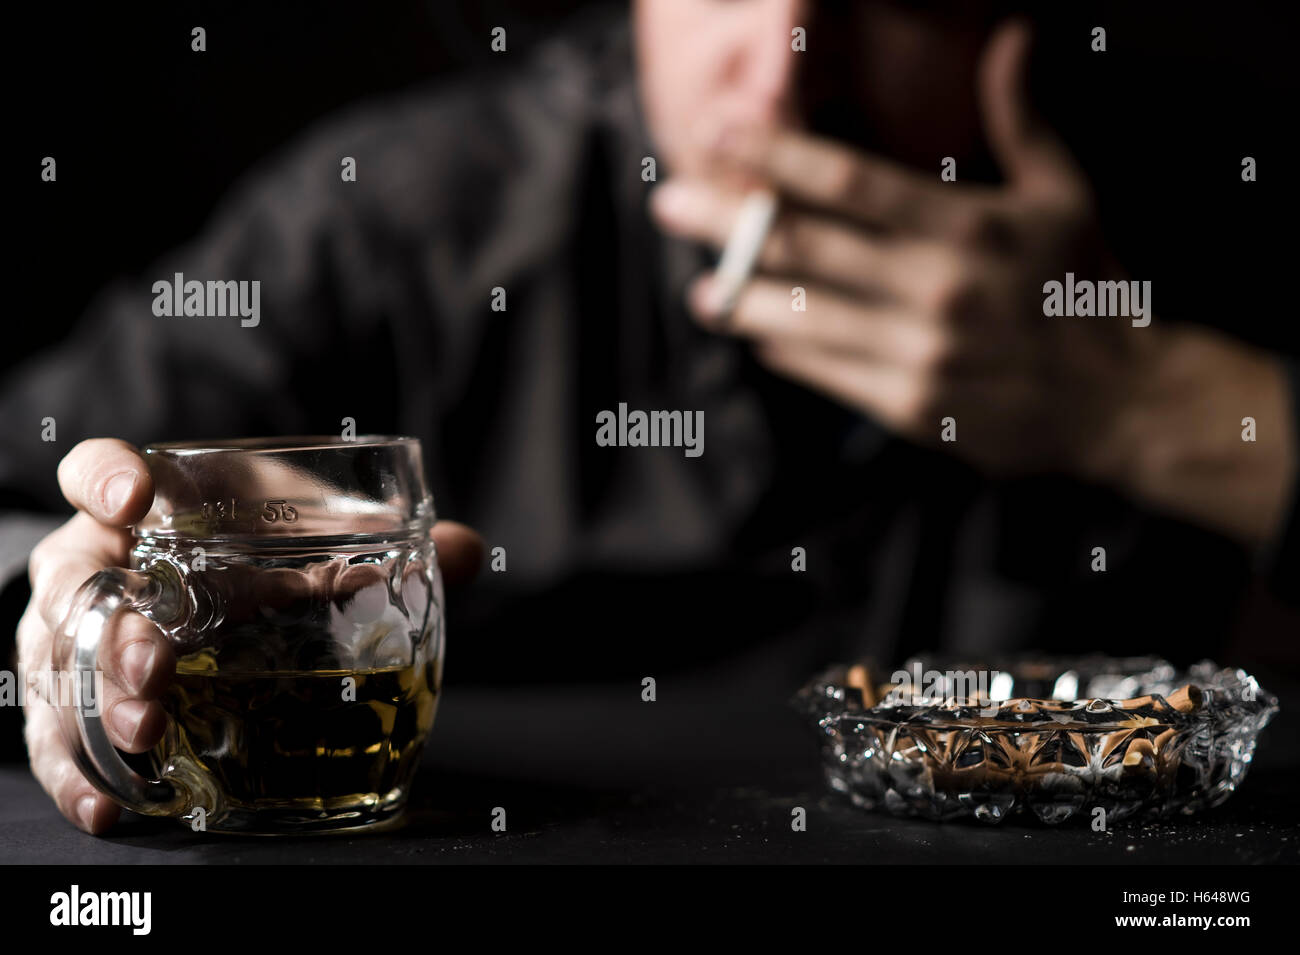 Man with beer and cigarette Stock Photo